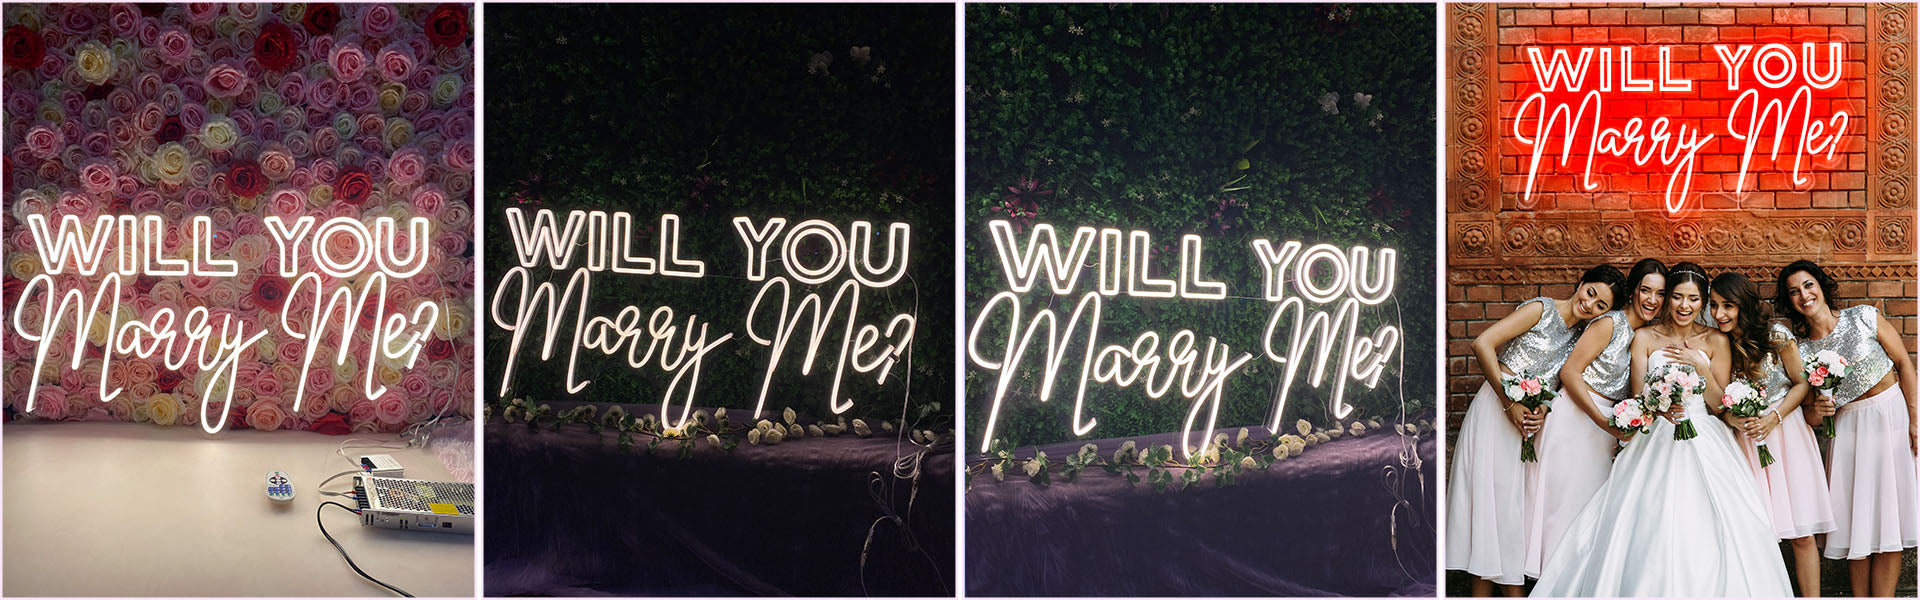 Will you marry me led neon light sign